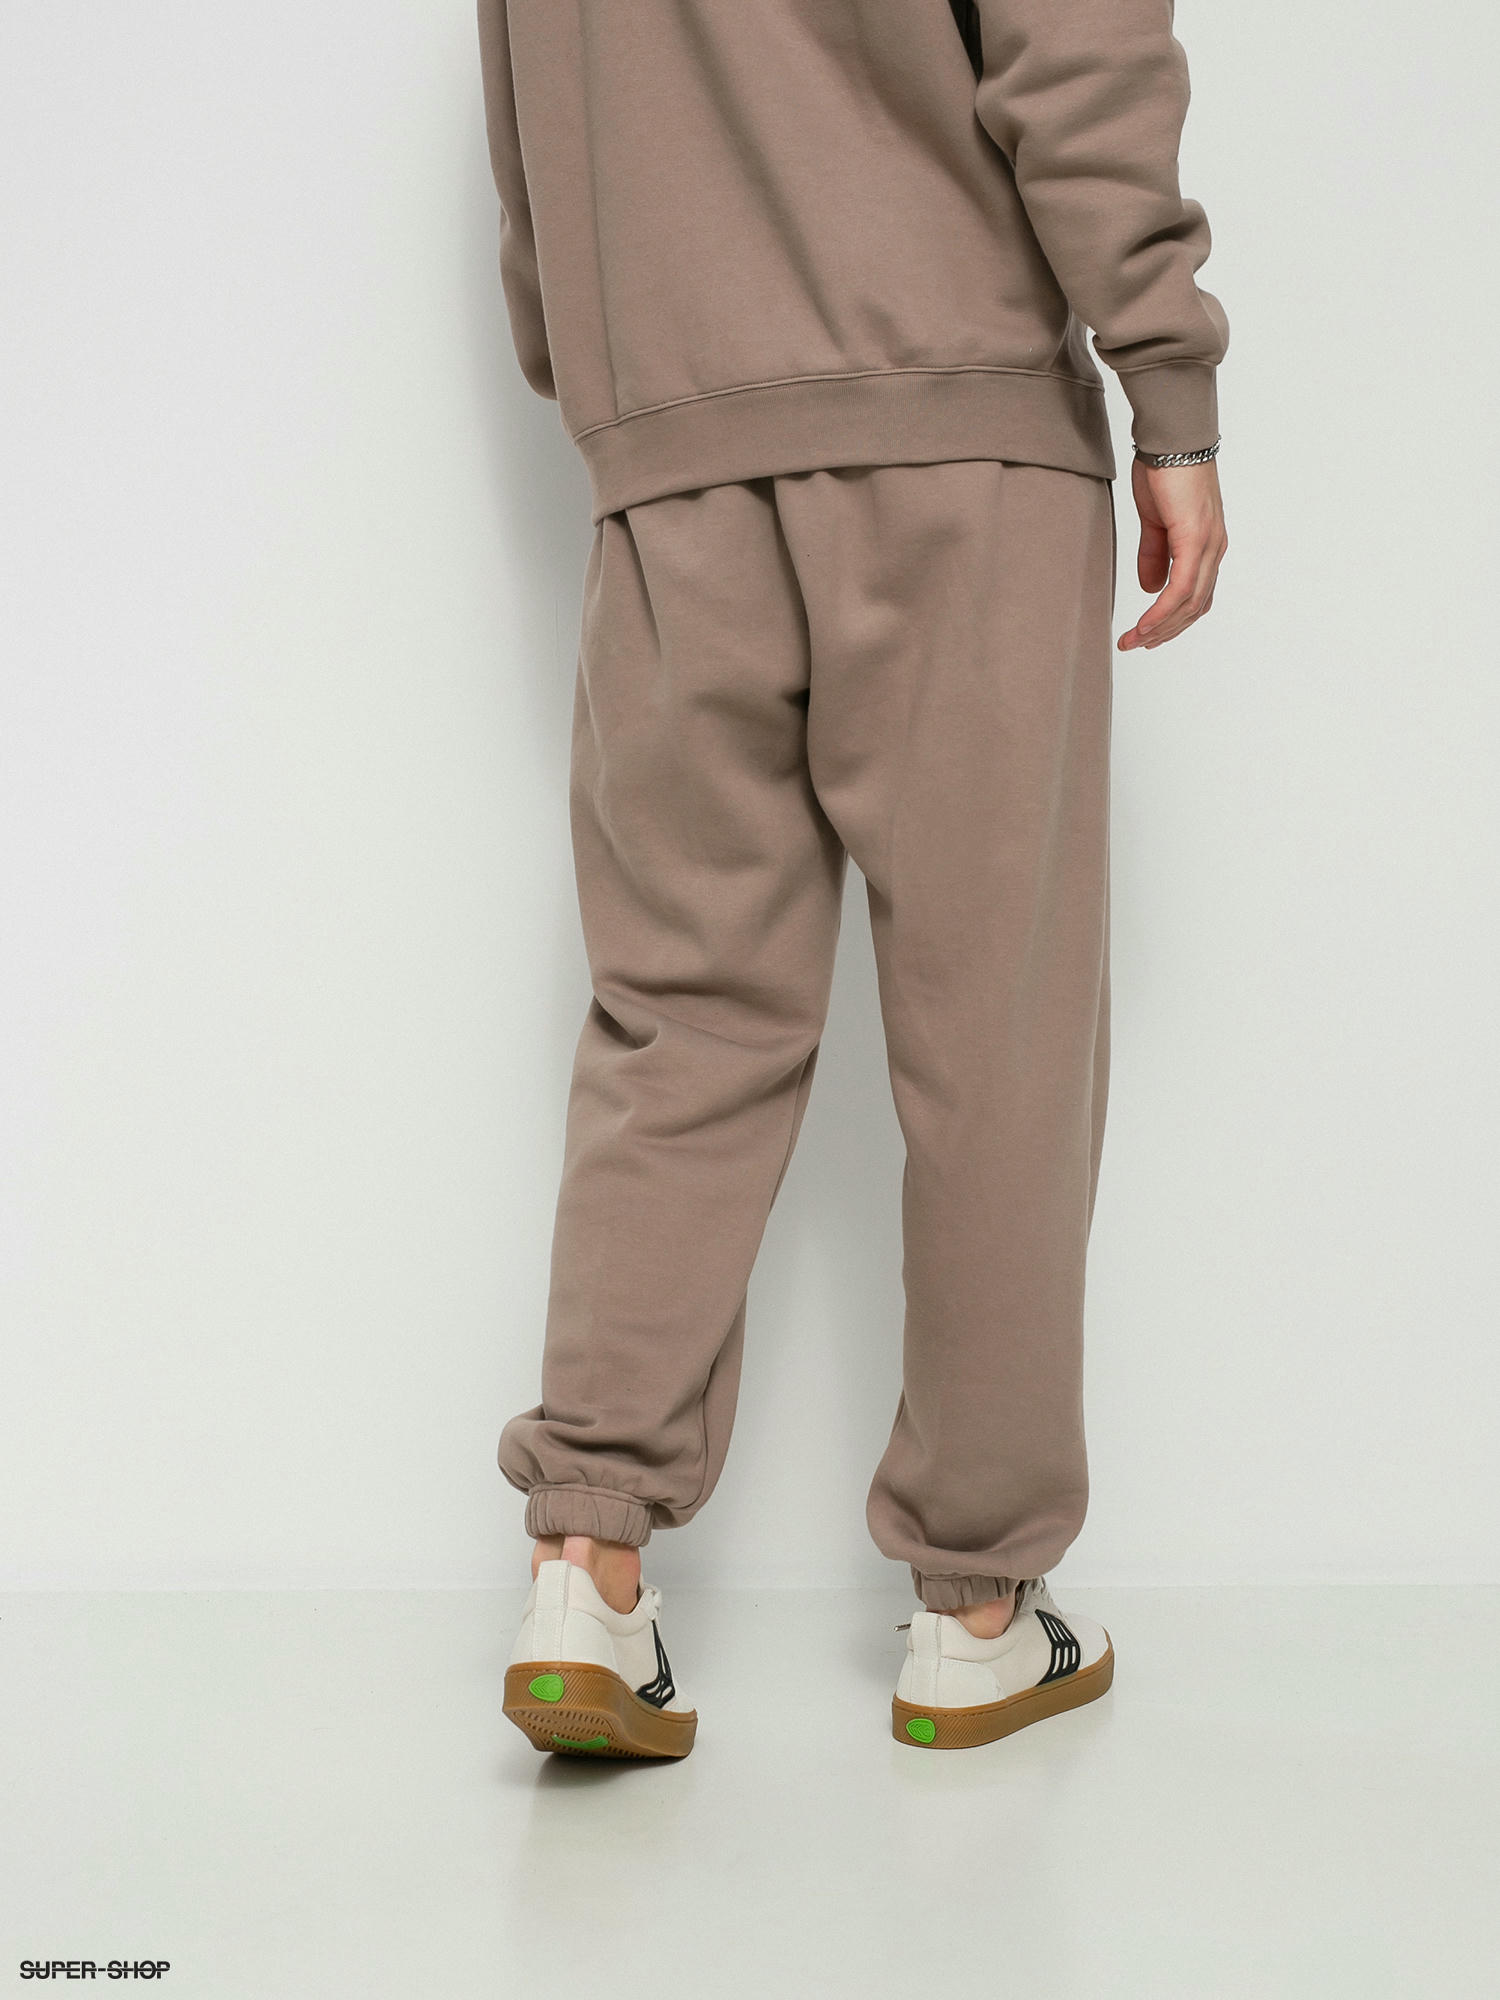 Linear Pants Originals adidas brown) TRF (chalky